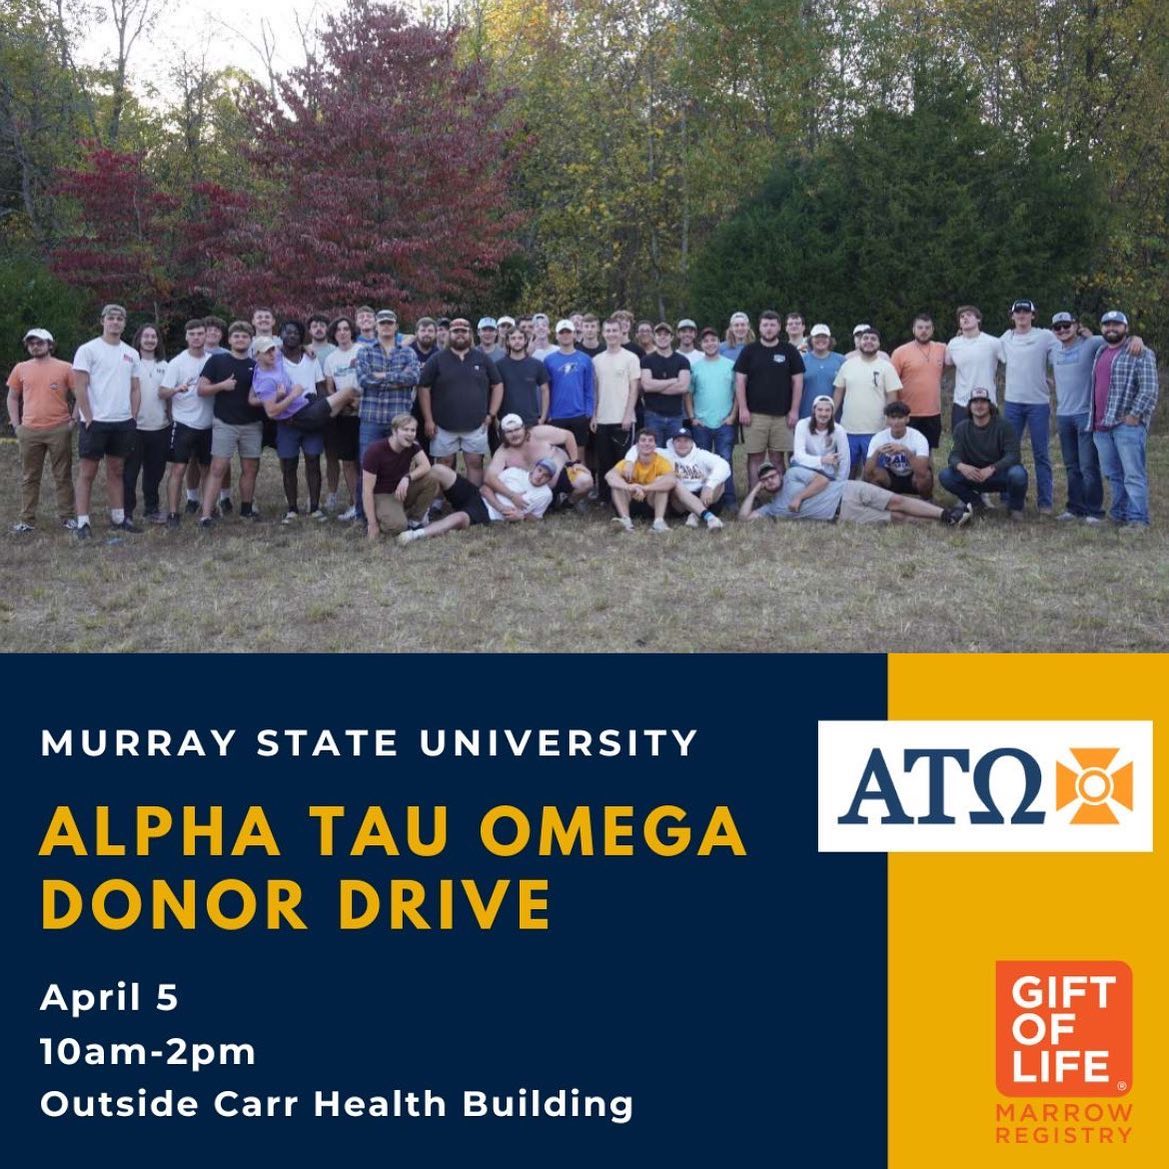 Gift of Life - Murray State ATO Philanthropy